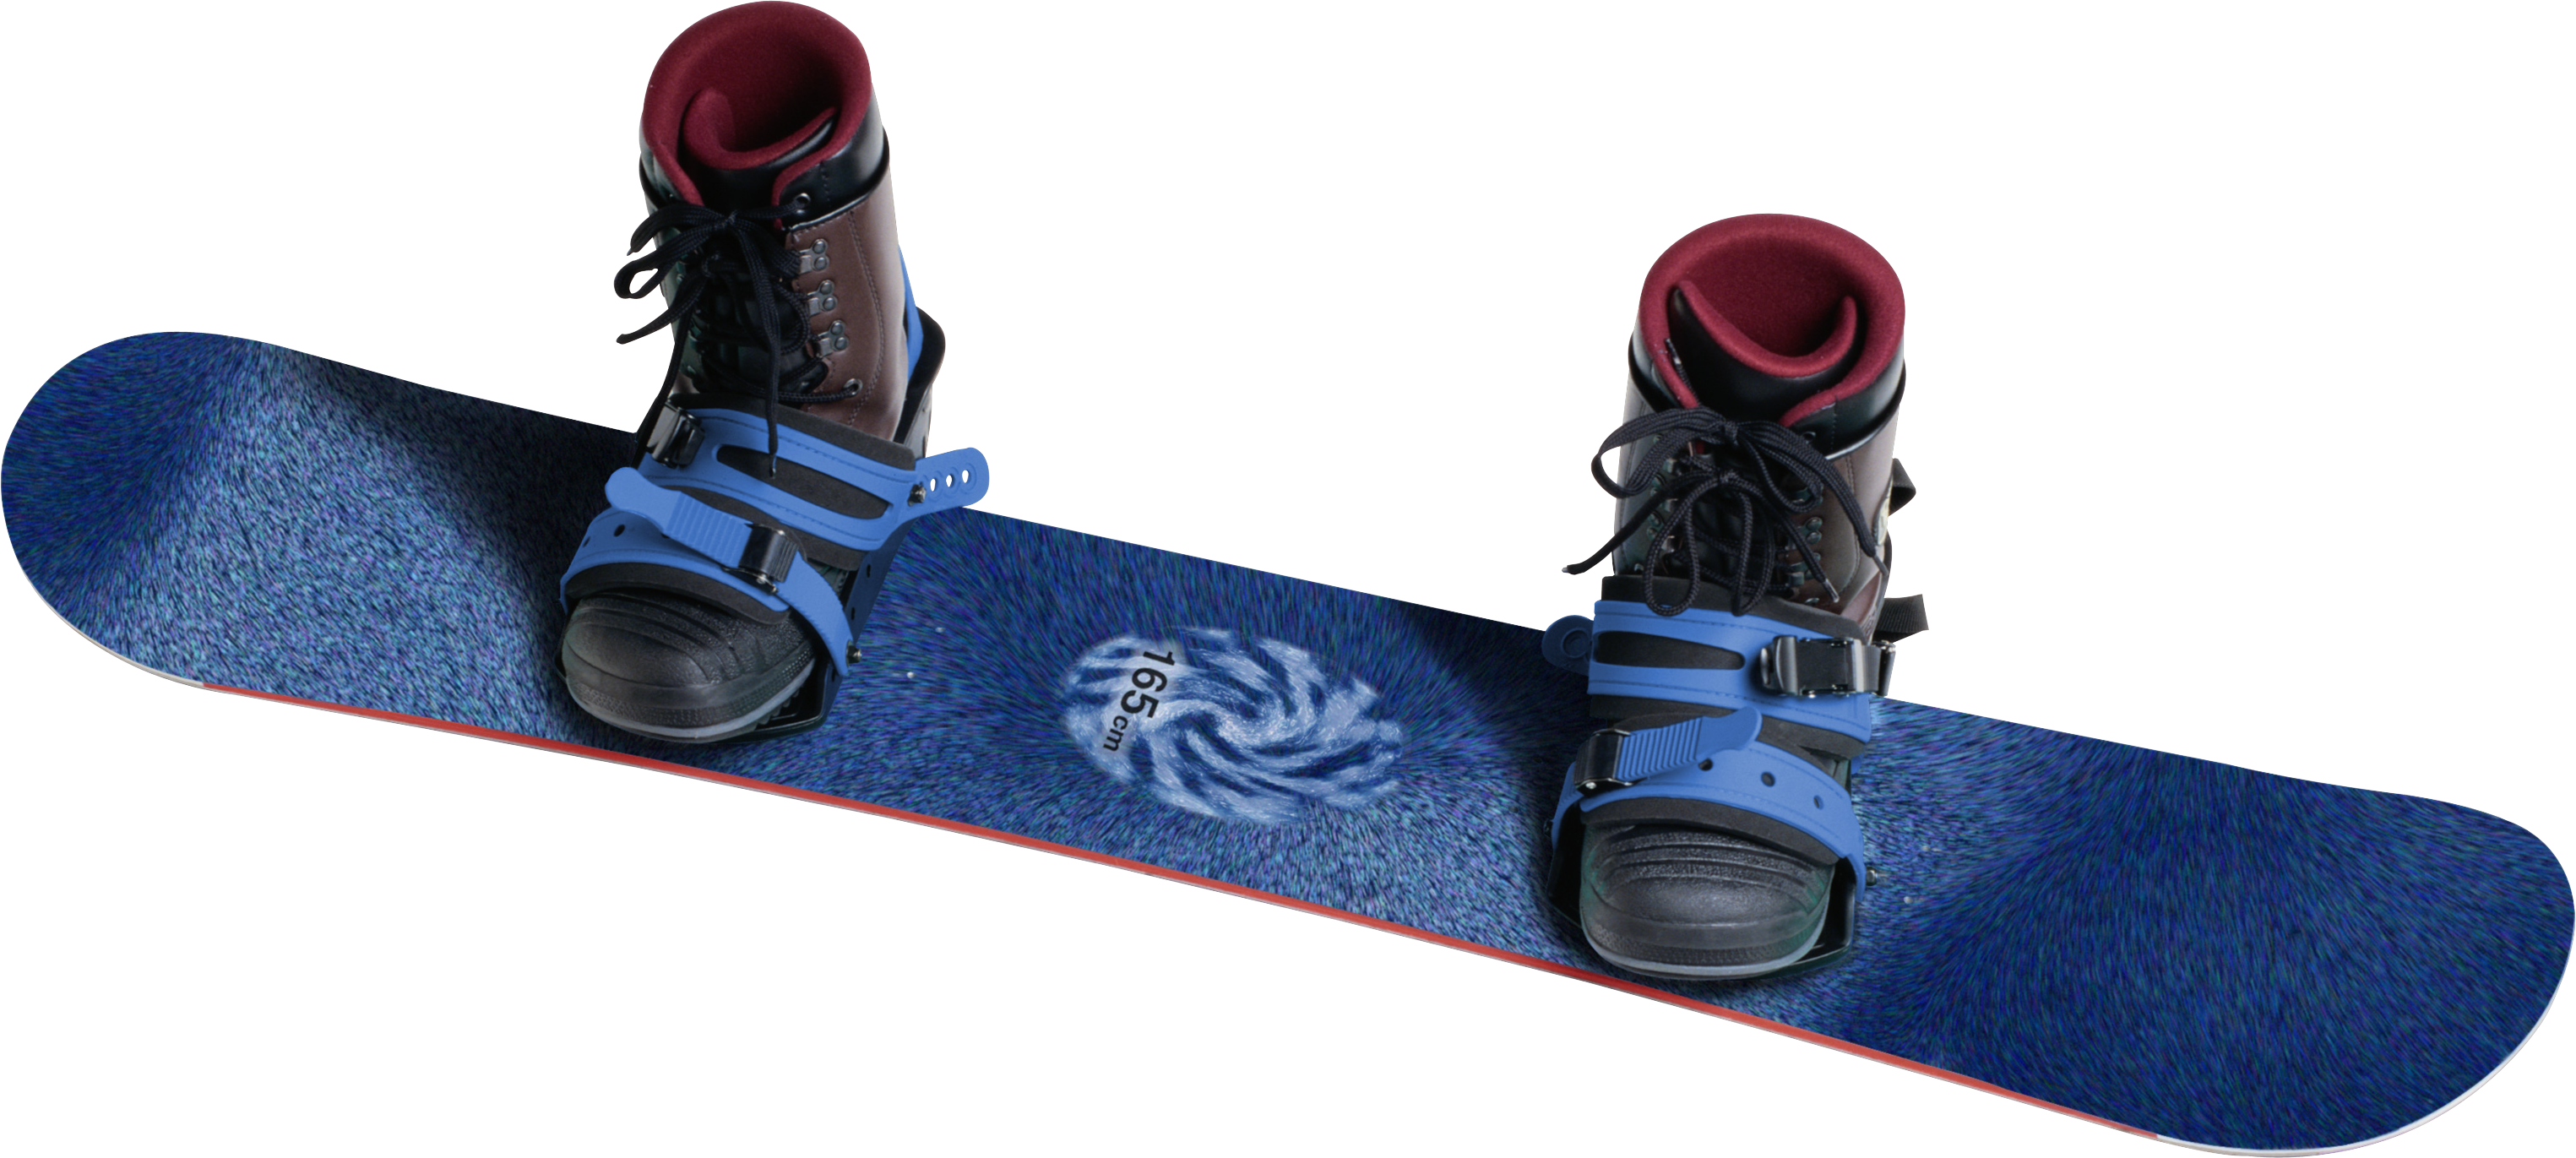 Snowboard PNG - 3500